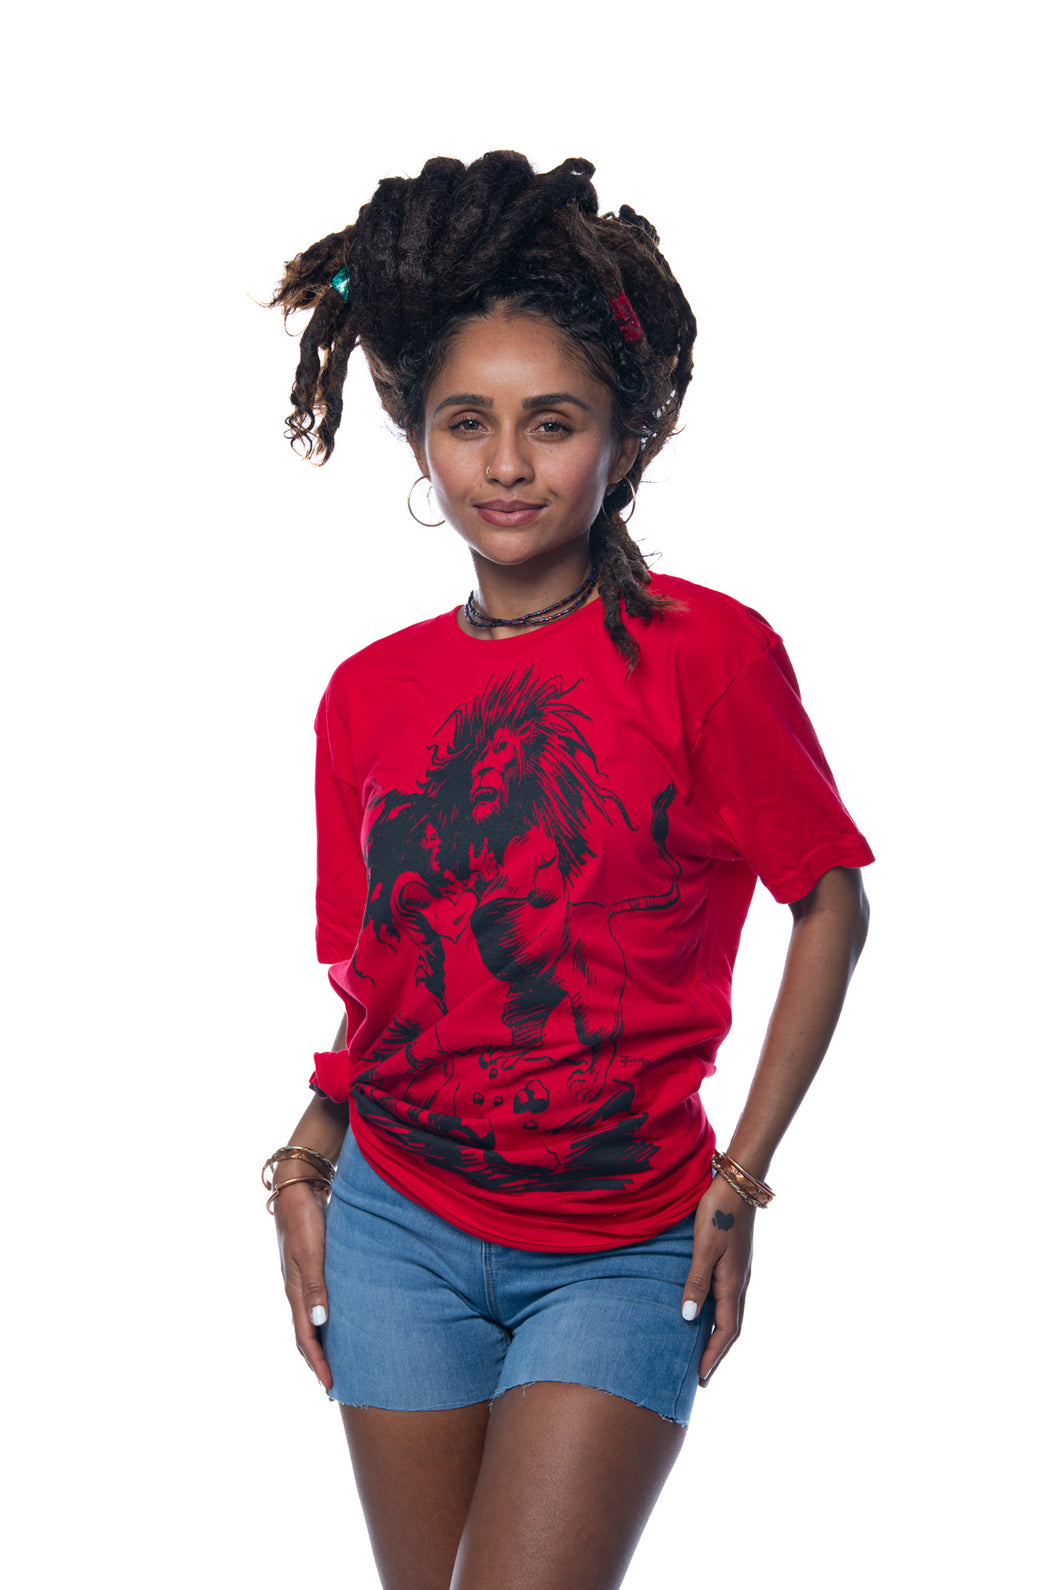 Cooyah Jamaica women's crew neck tee with Dread and Lion rasta graphic in red.  